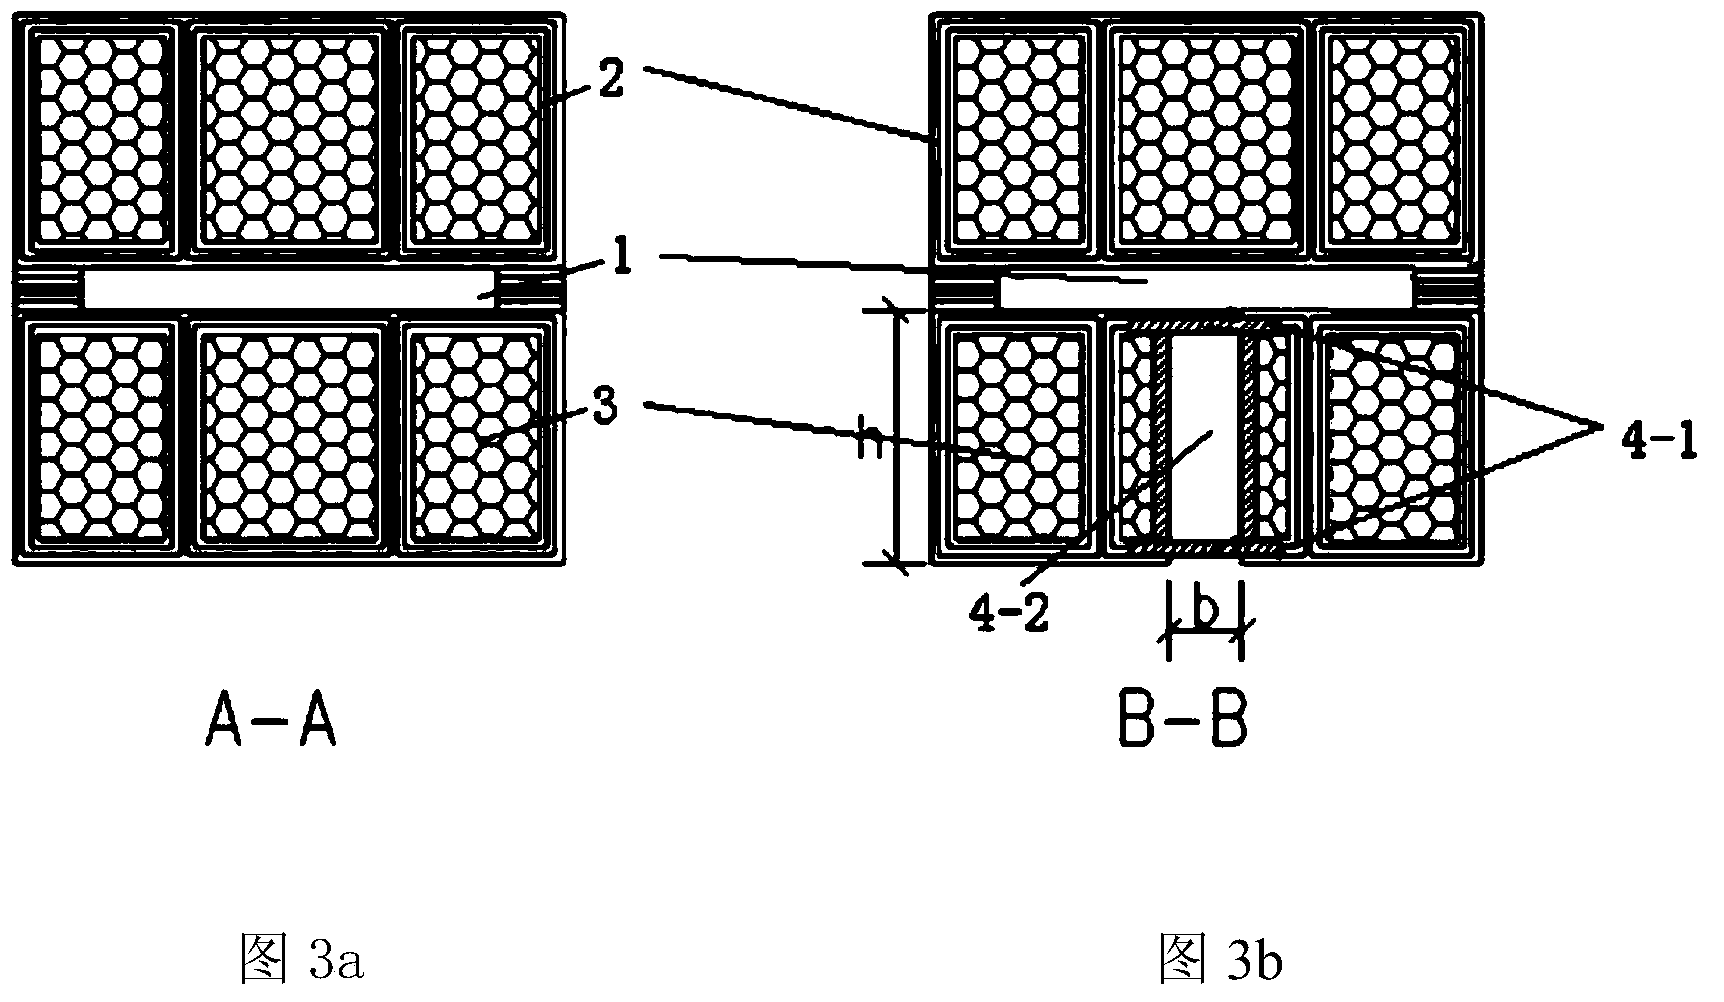 Non-welding buckling restraining support with inspection windows